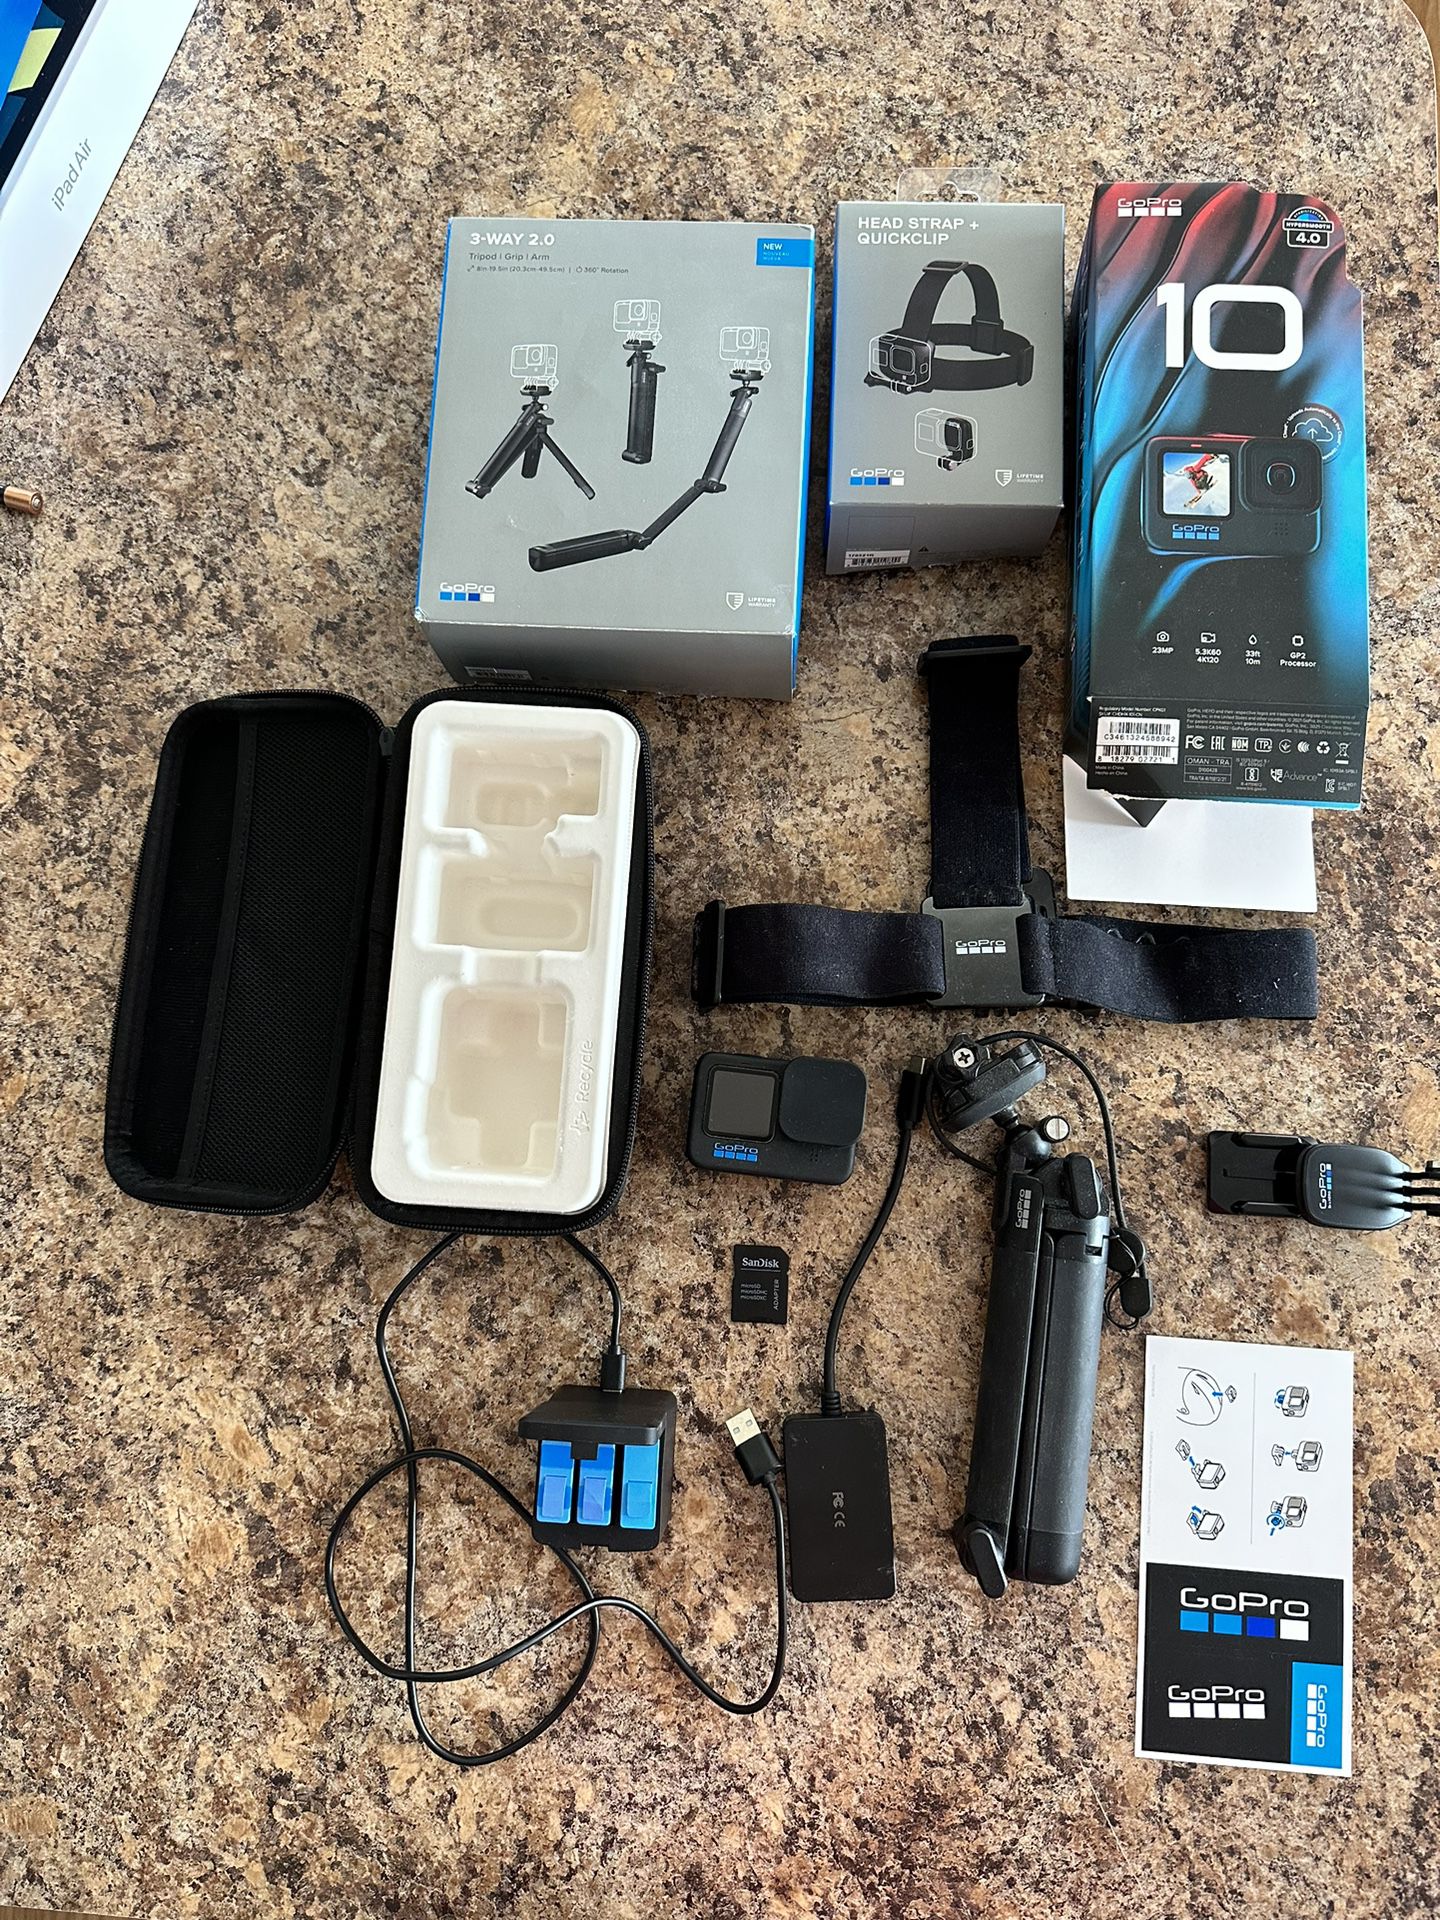 Gopro 10 with extra 3-way mount/battery charger/128gb sd card/head strap/card reader